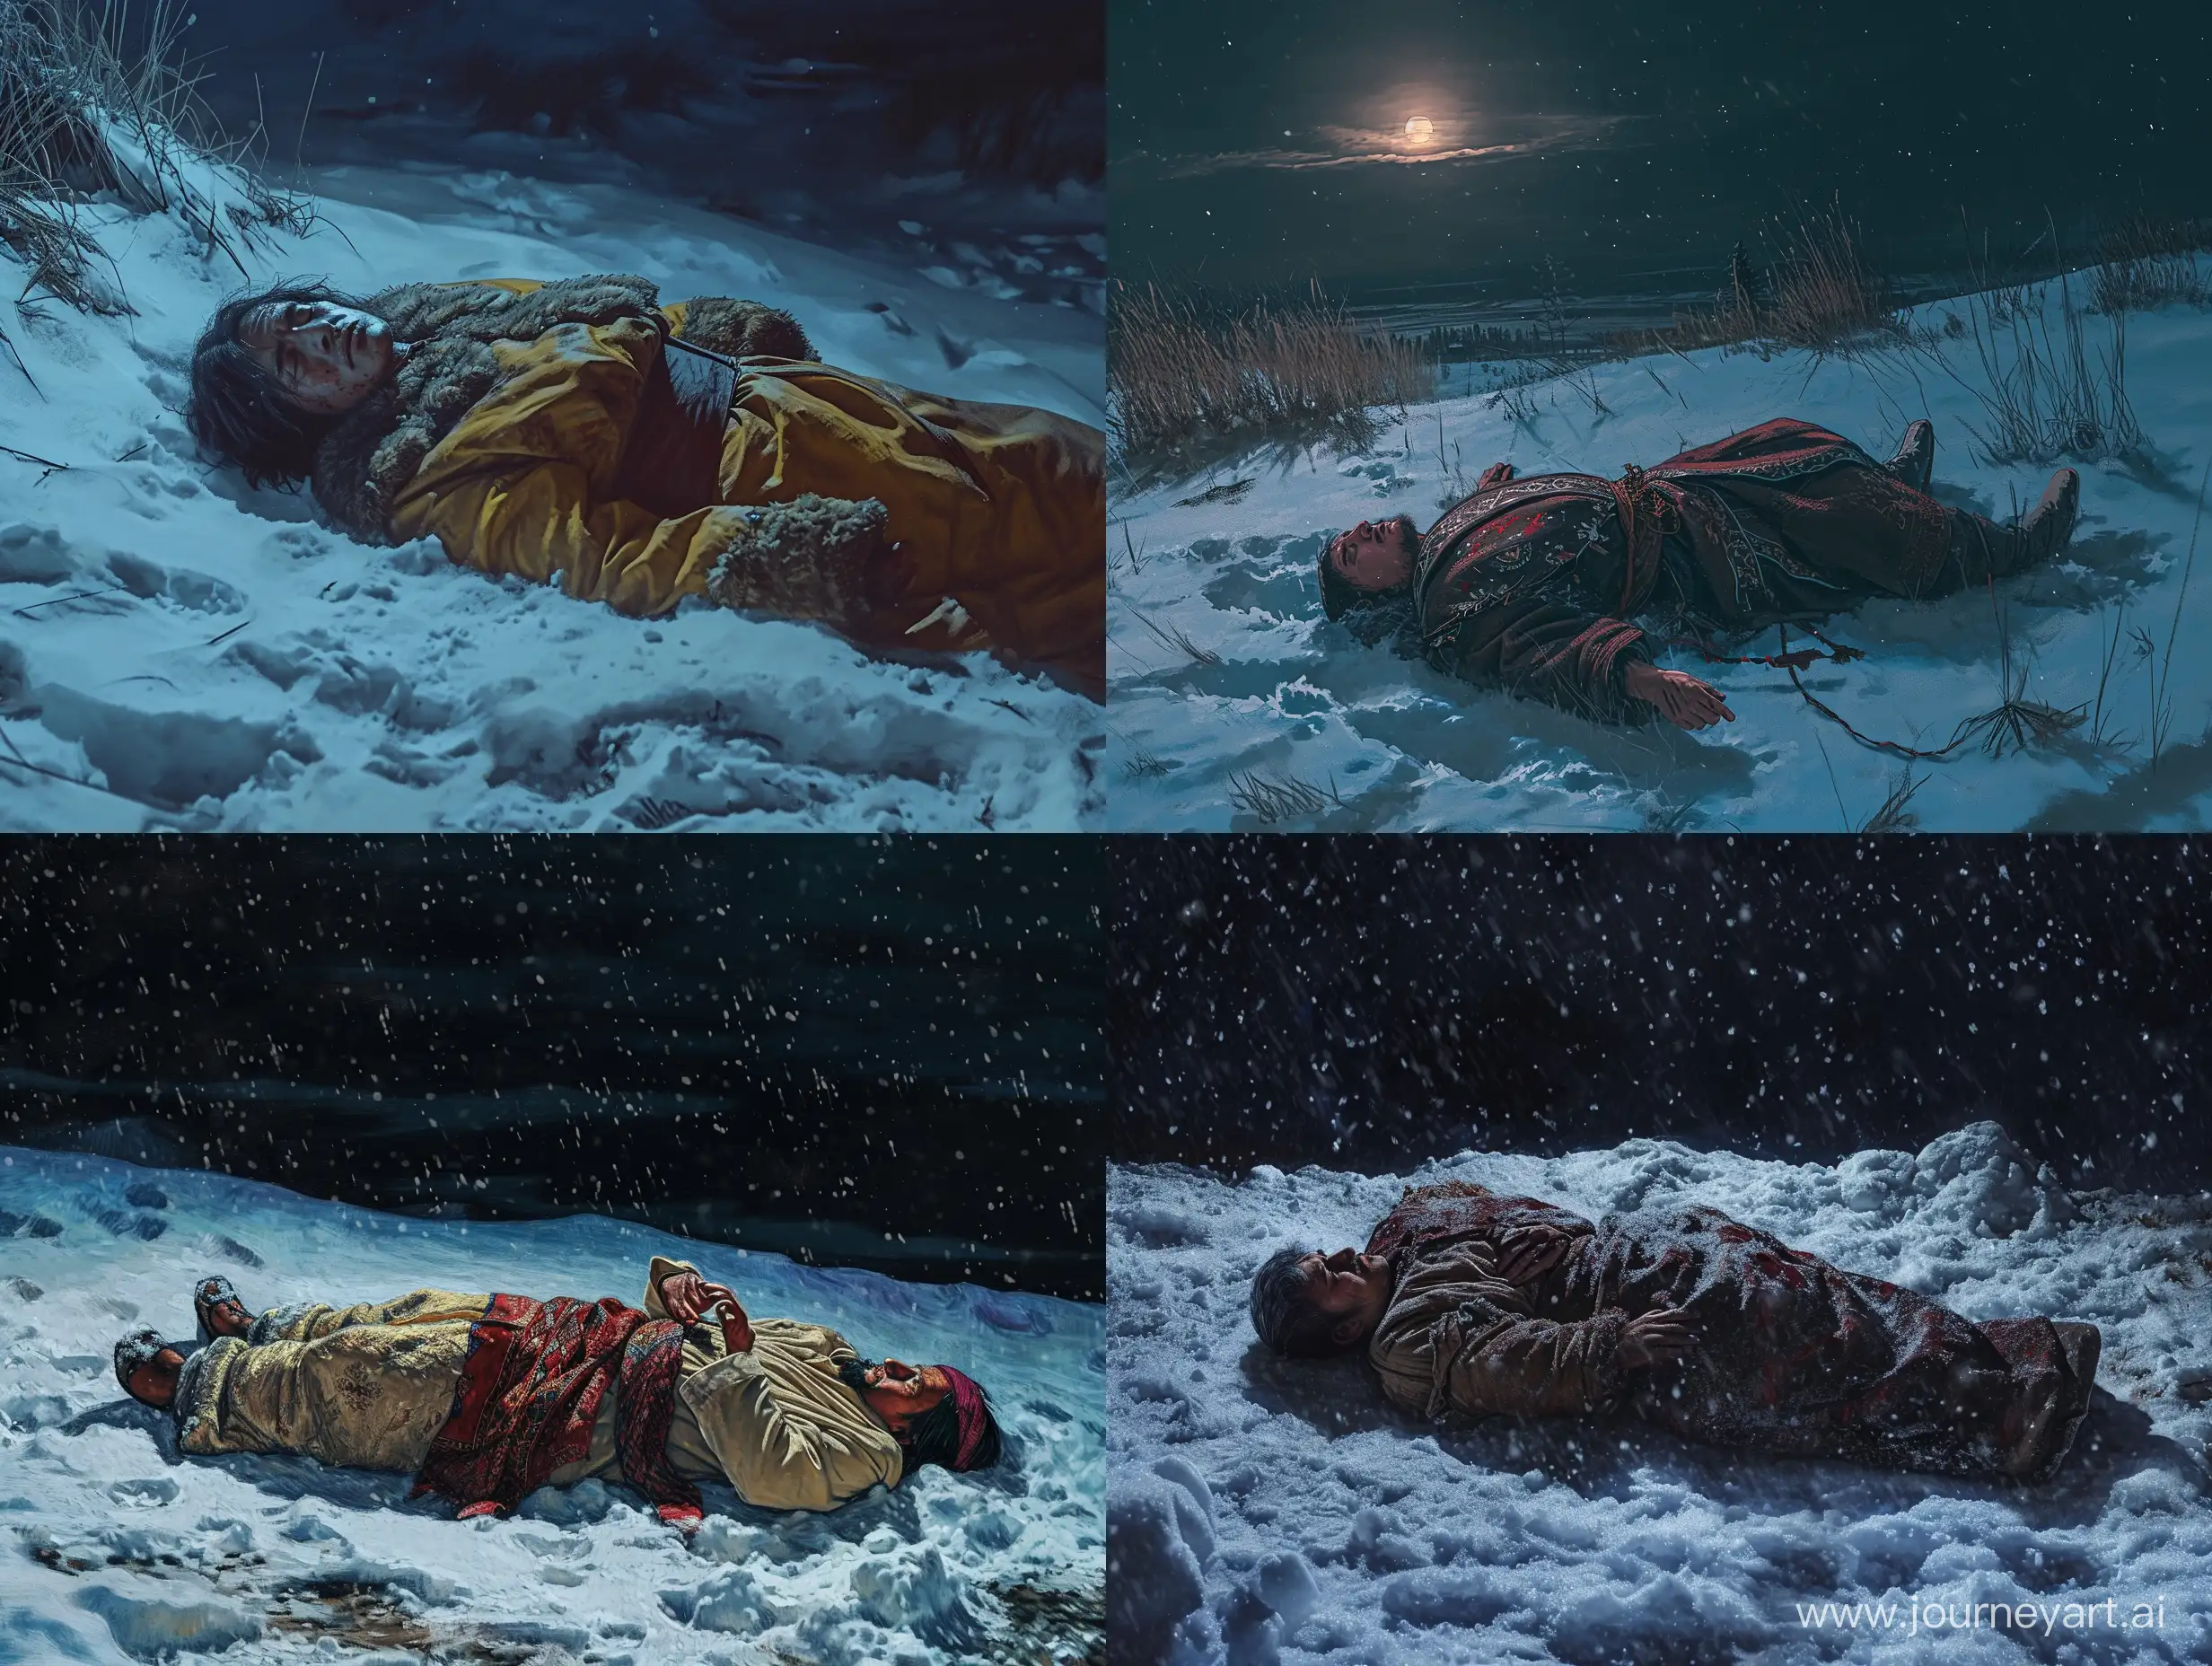 Realistic-Depiction-of-a-Kazakh-Individual-Lying-in-the-Snow-at-Night